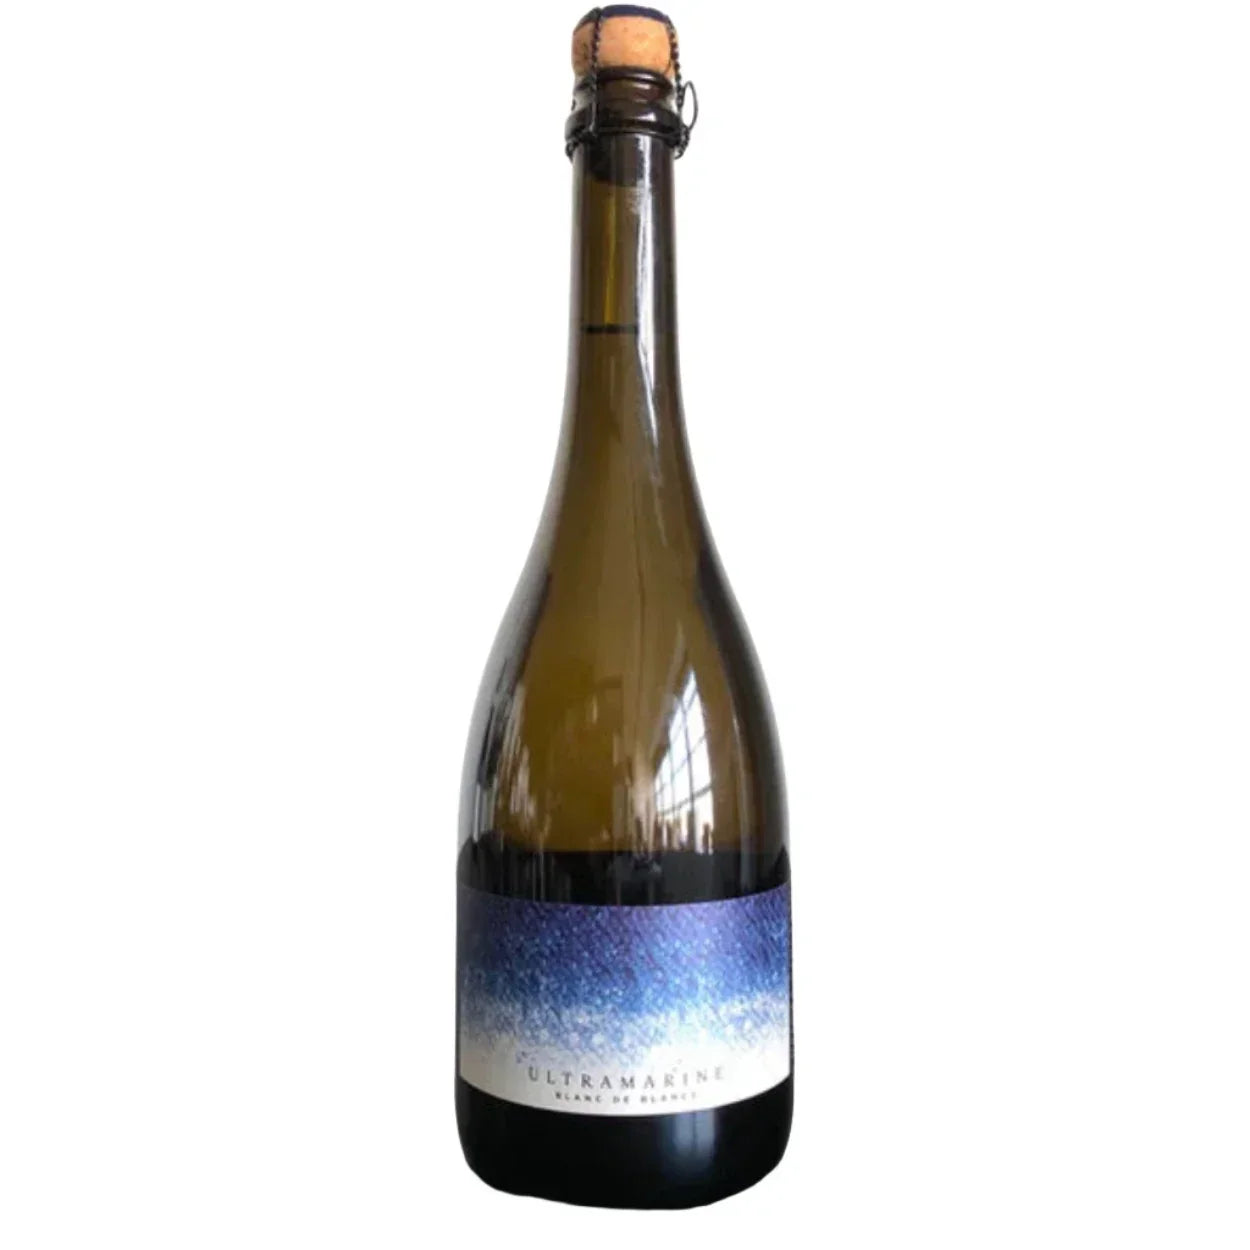 2018 Ultramarine Sparkling Keefer Ranch Vynd Blancs de Blanc California, USA - The Wine Connection